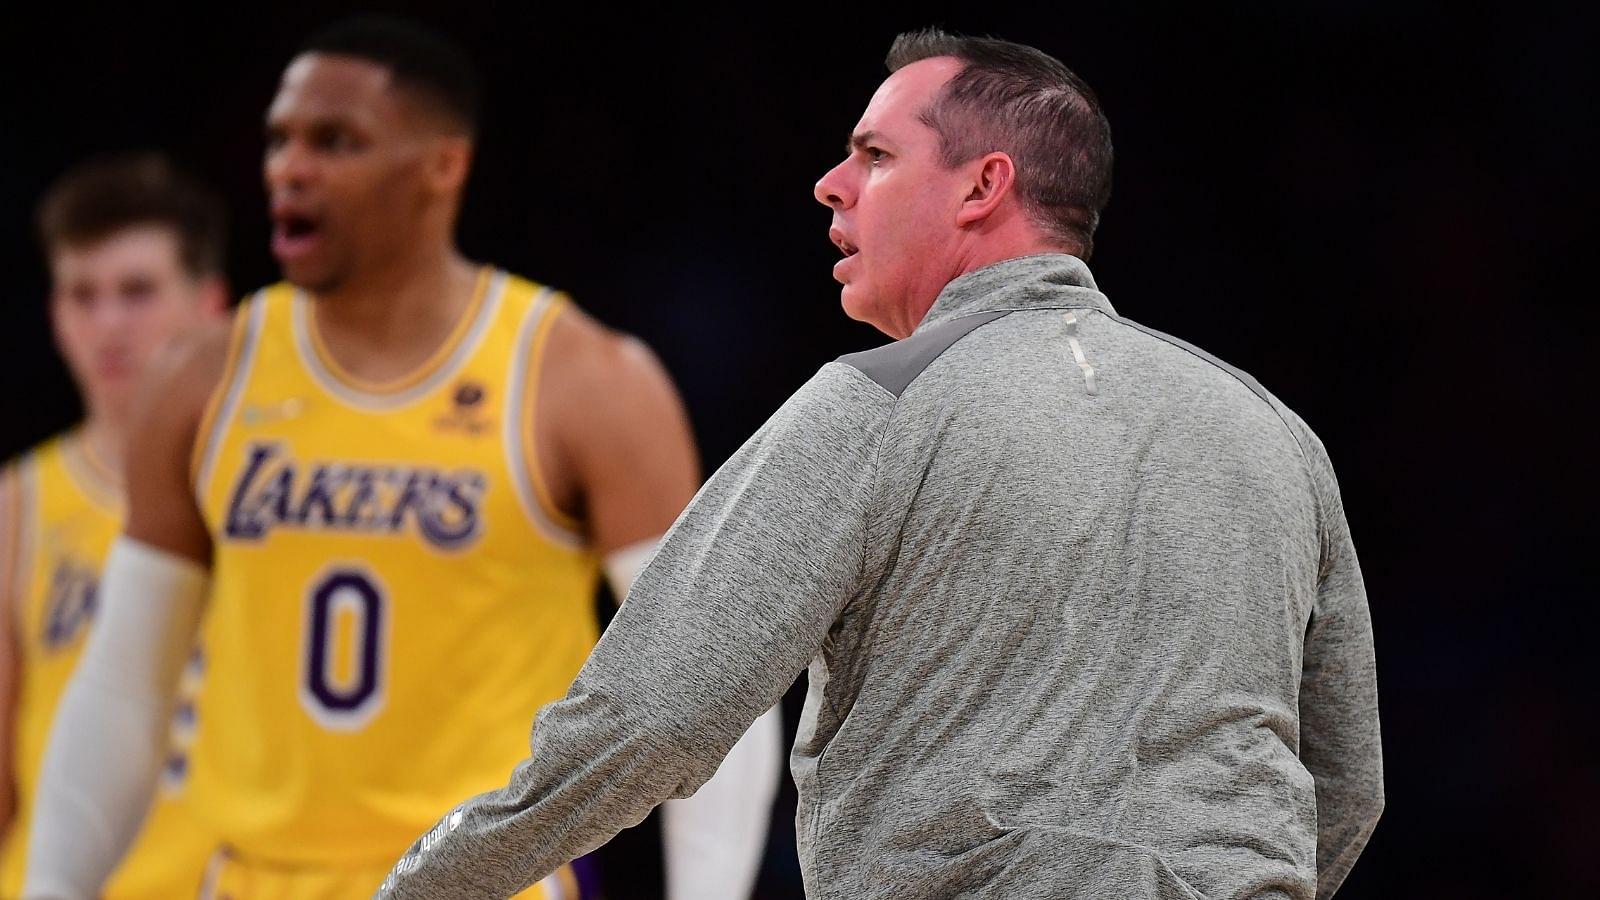 "Frank Vogel, who you fronting for? Everyone and their grandmama knows you're done": Los Angeles Lakers coach will still not admit their season is over, tries to put up a brave face